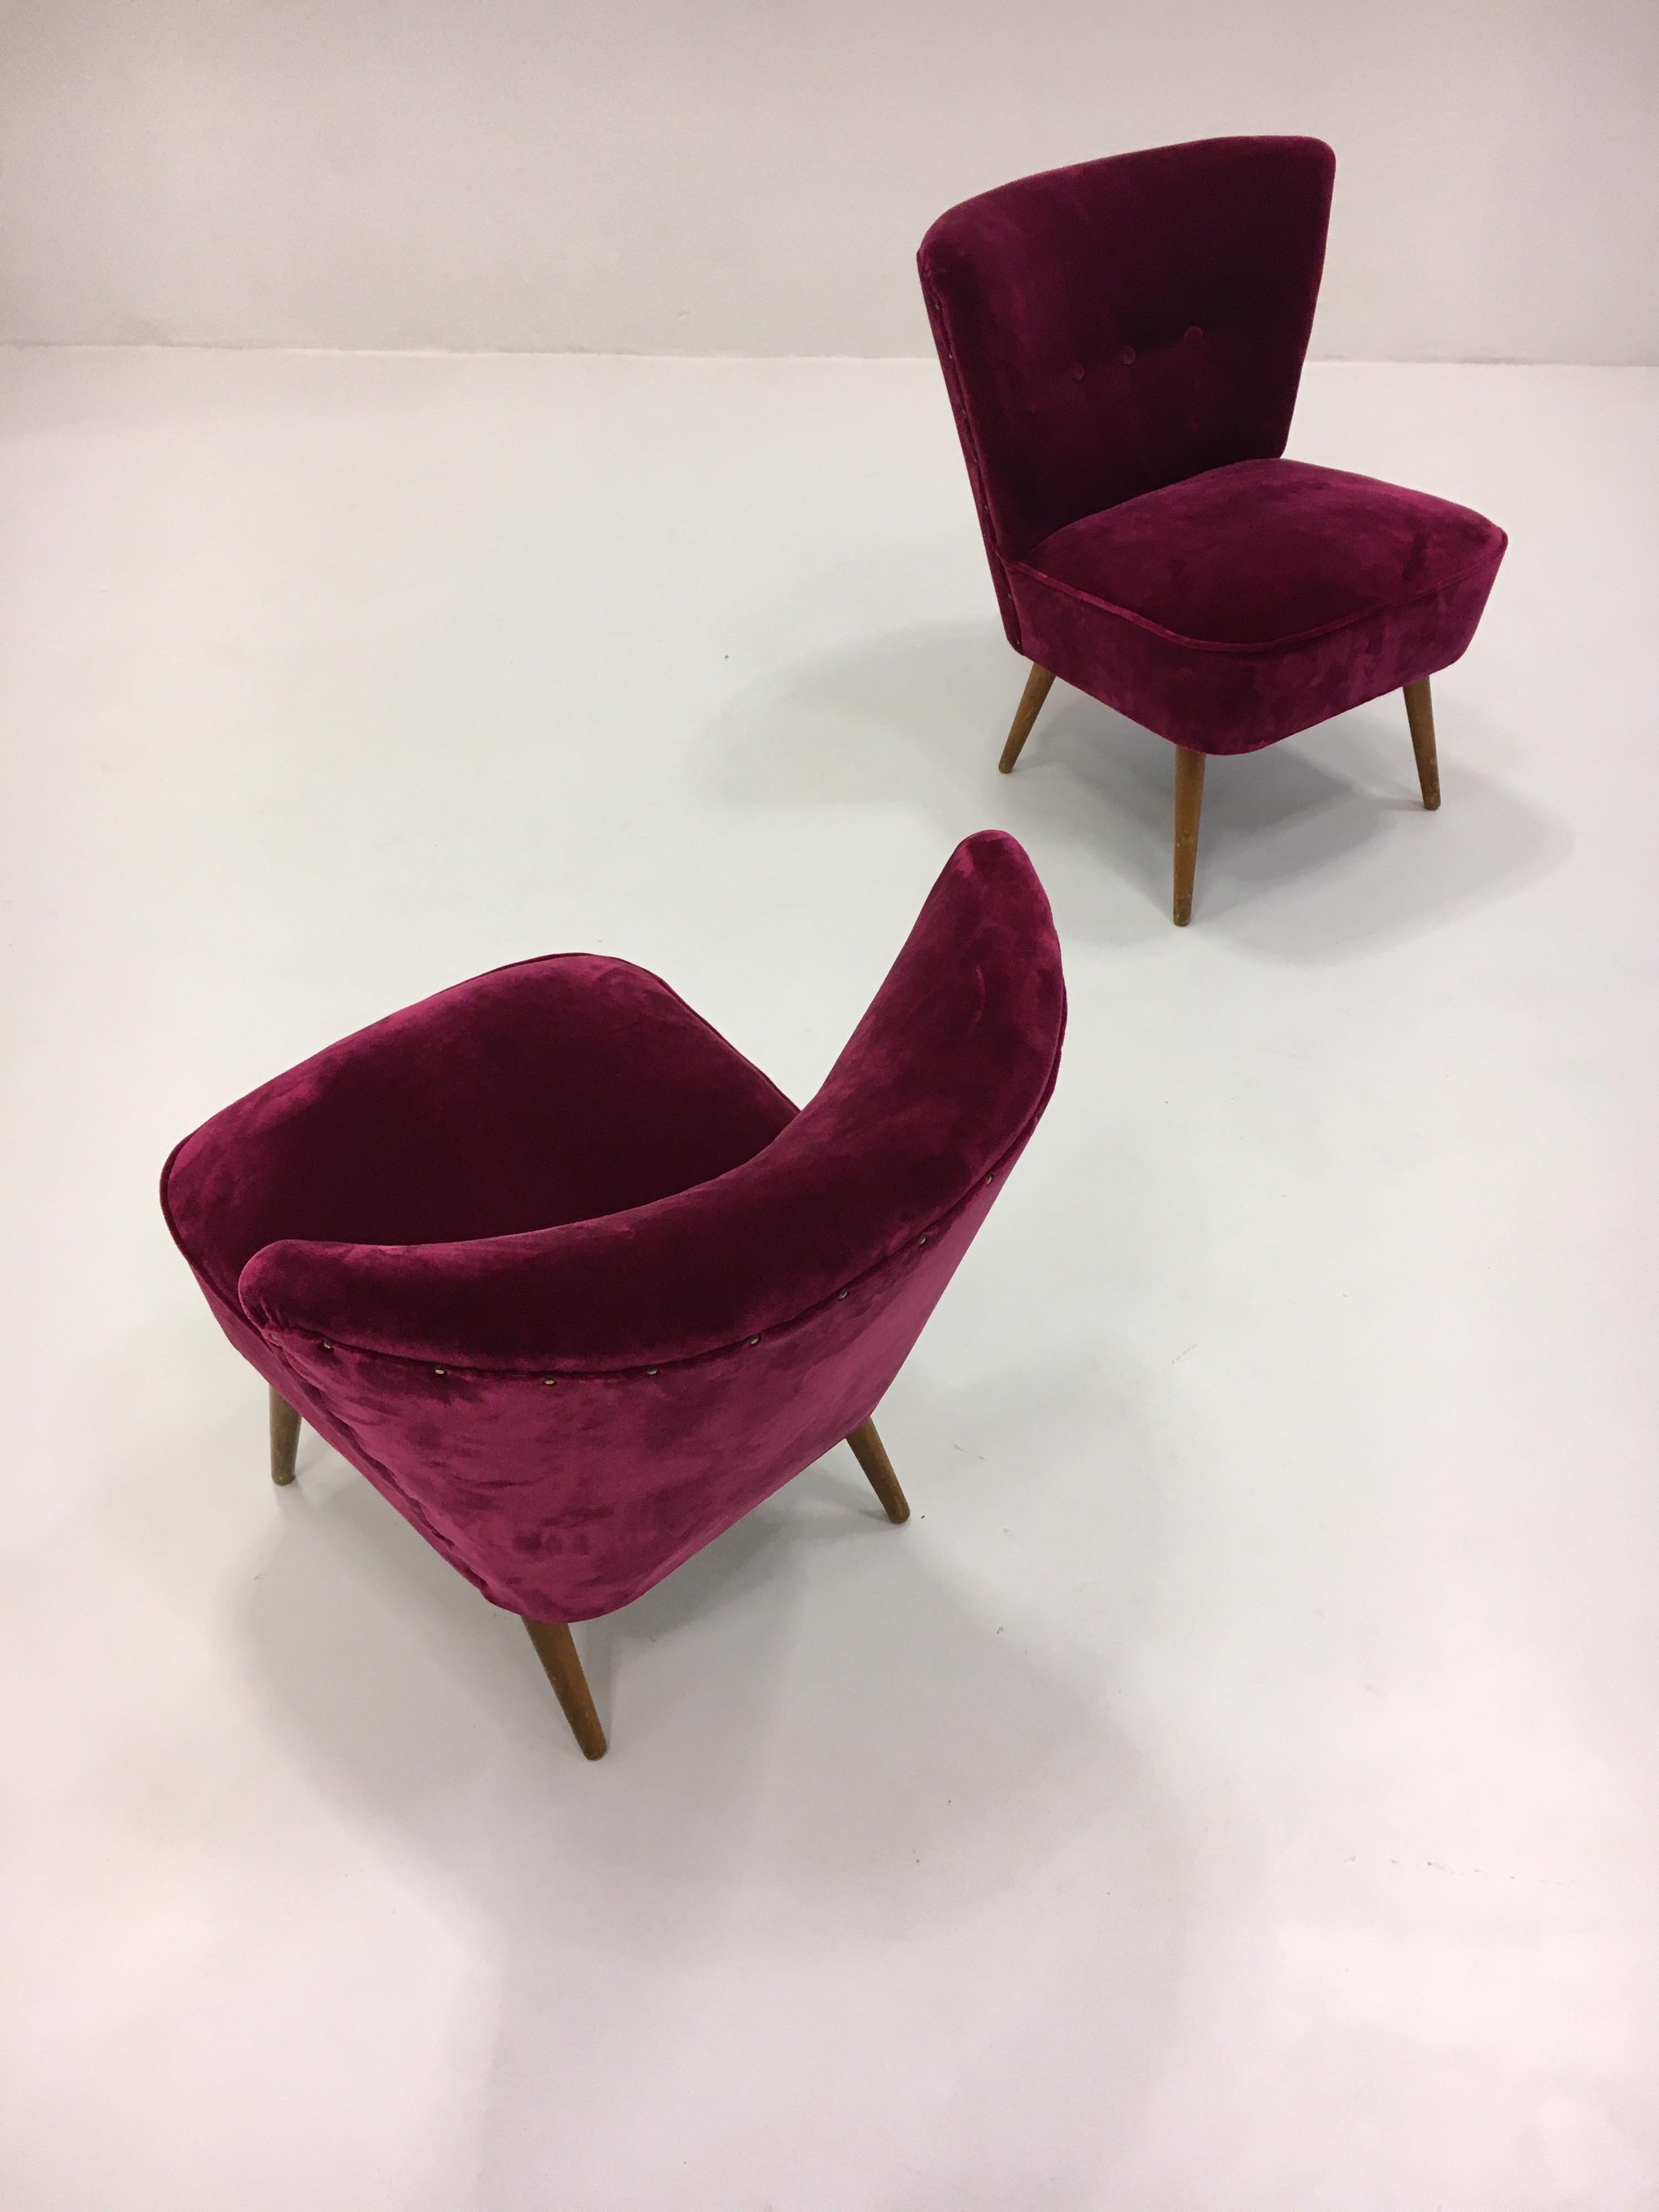 Mid-20th Century Mid-Century Modern Cocktail Chairs, France, 1950s For Sale